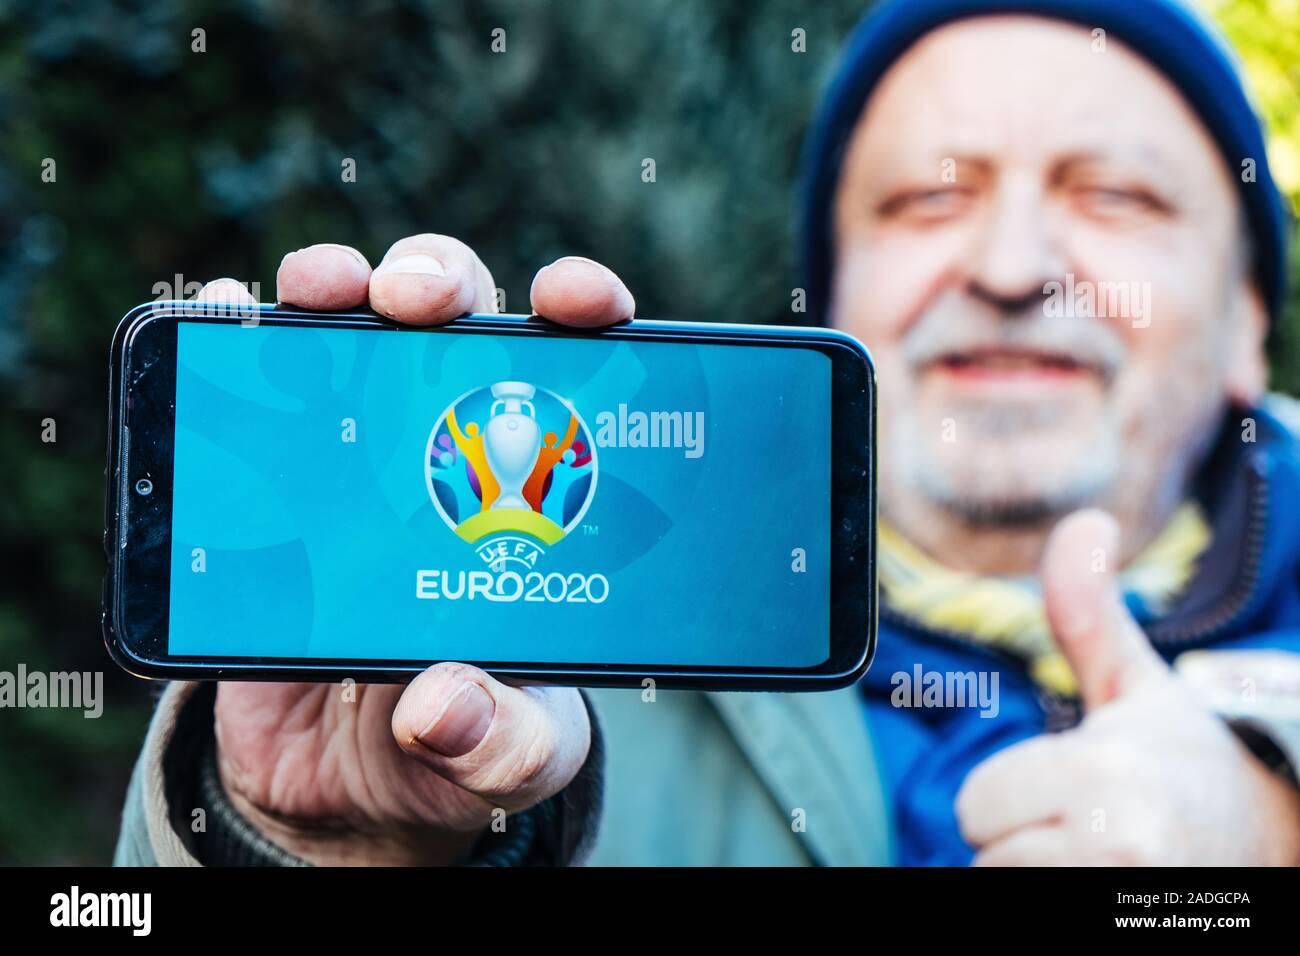 Senior Man is holding a smartphone with logo of UEFA Euro 2020 on screen Stock Photo